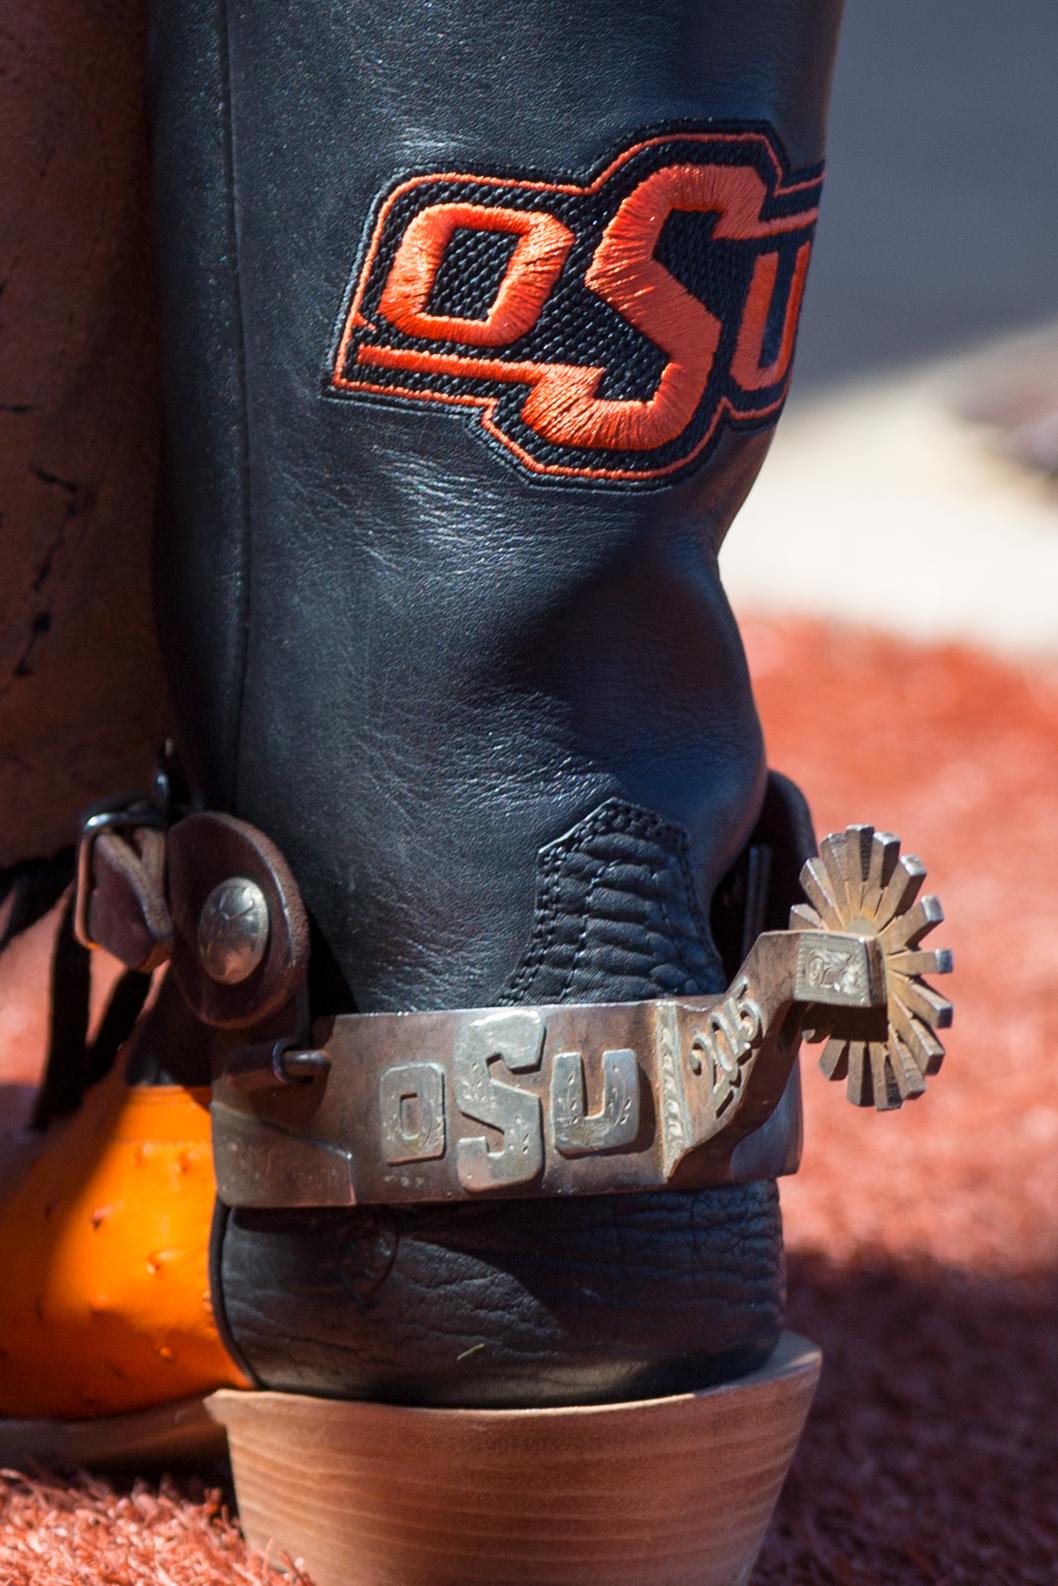 A black boot with spurs with an OSU logo on the calf of the boot